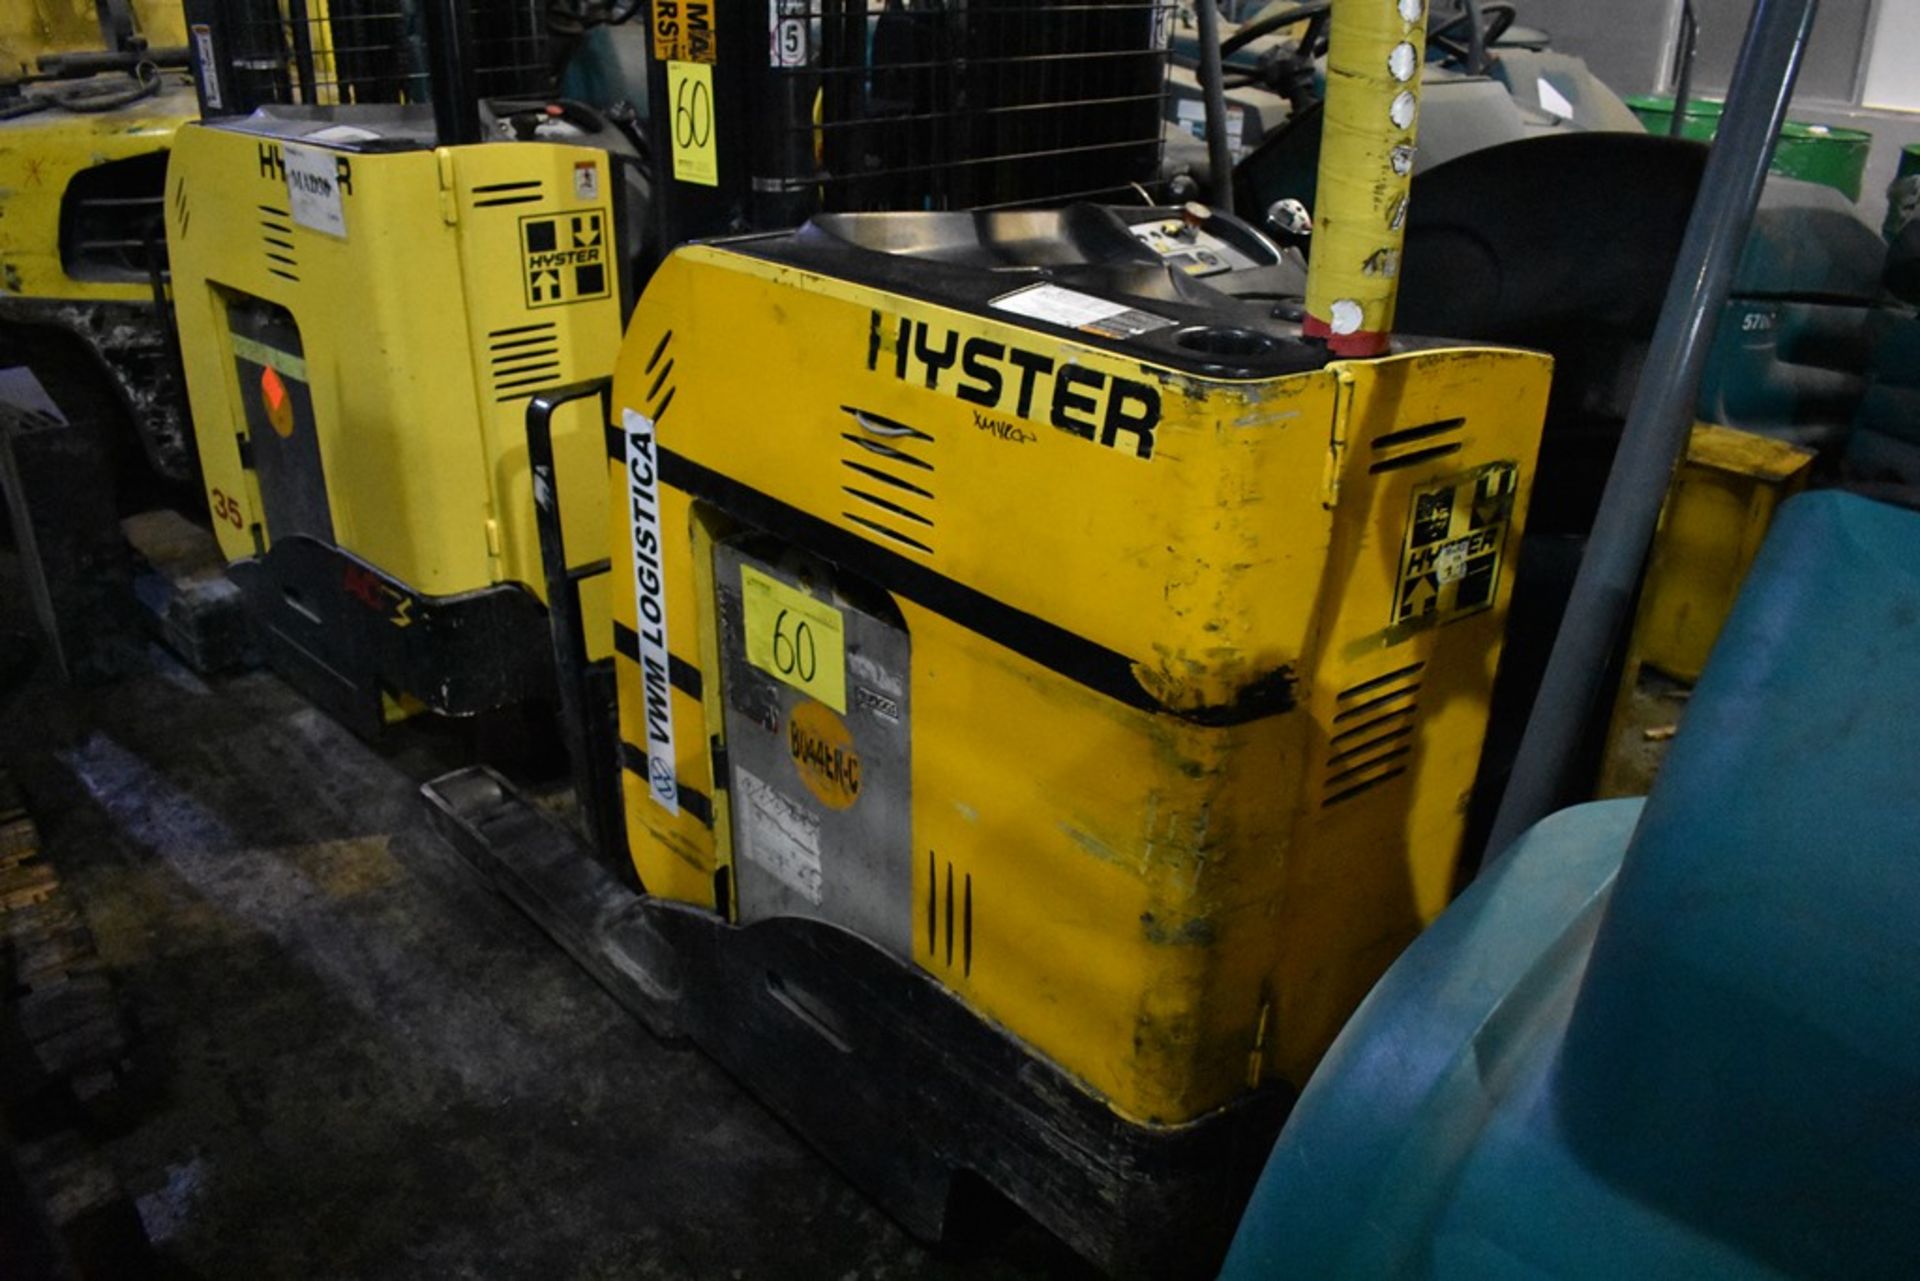 Hyster electric Forklift, model N45ZR2-16.5, 500 lb capacity - Image 9 of 40